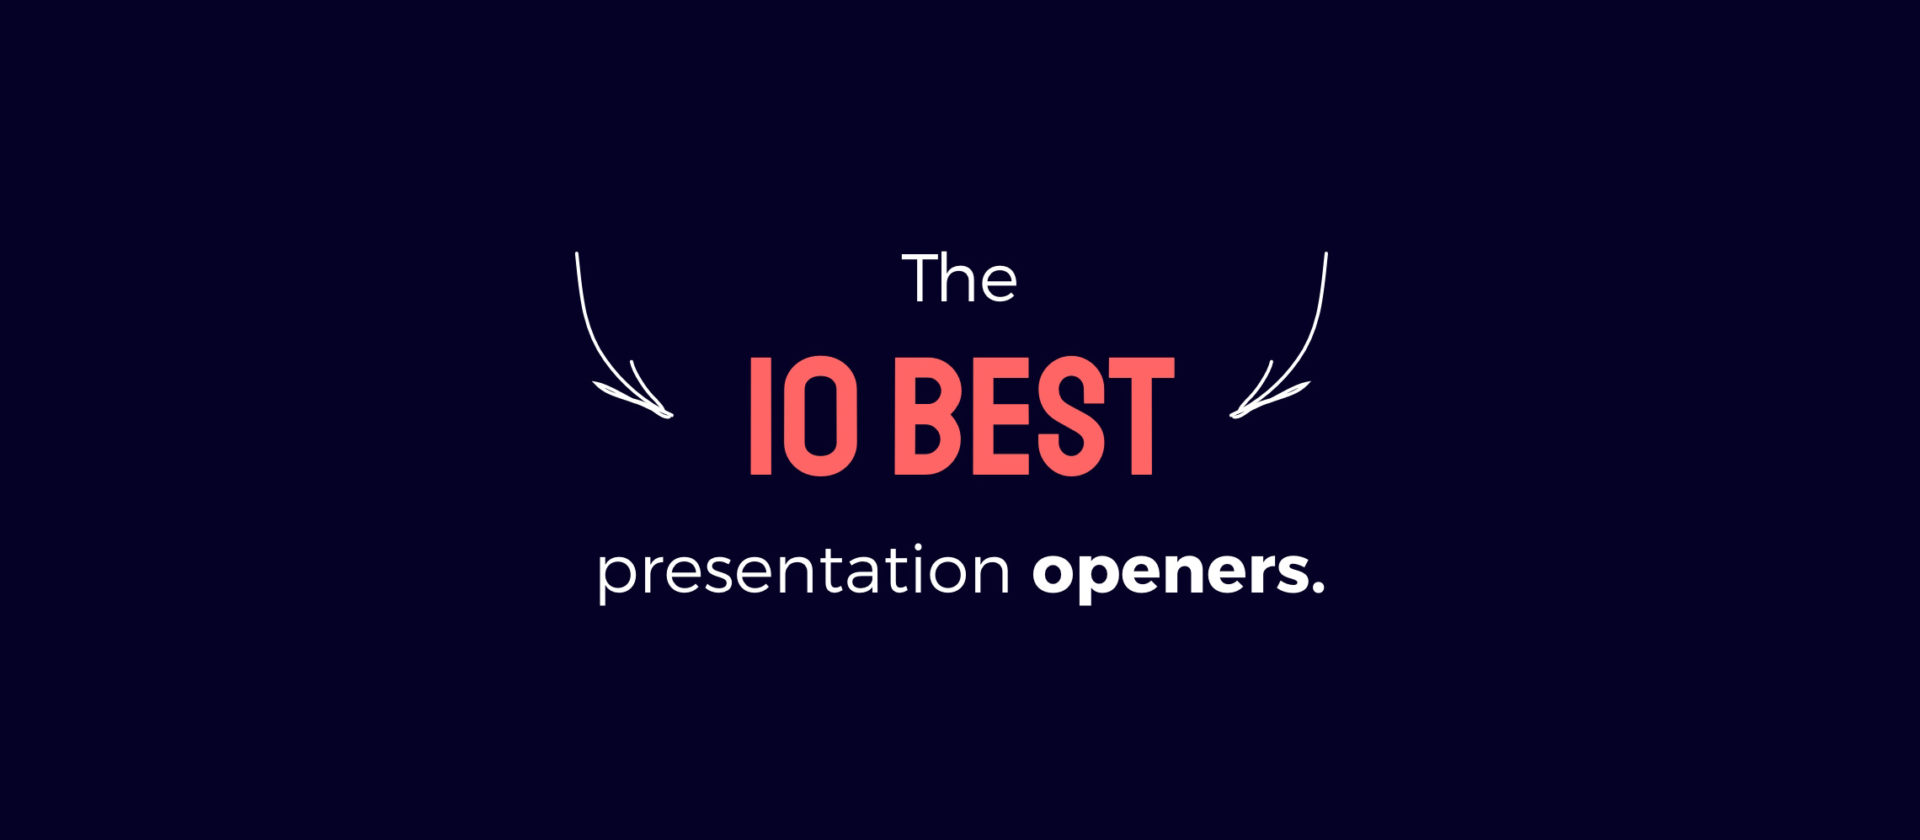 The 10 best presentation openers.